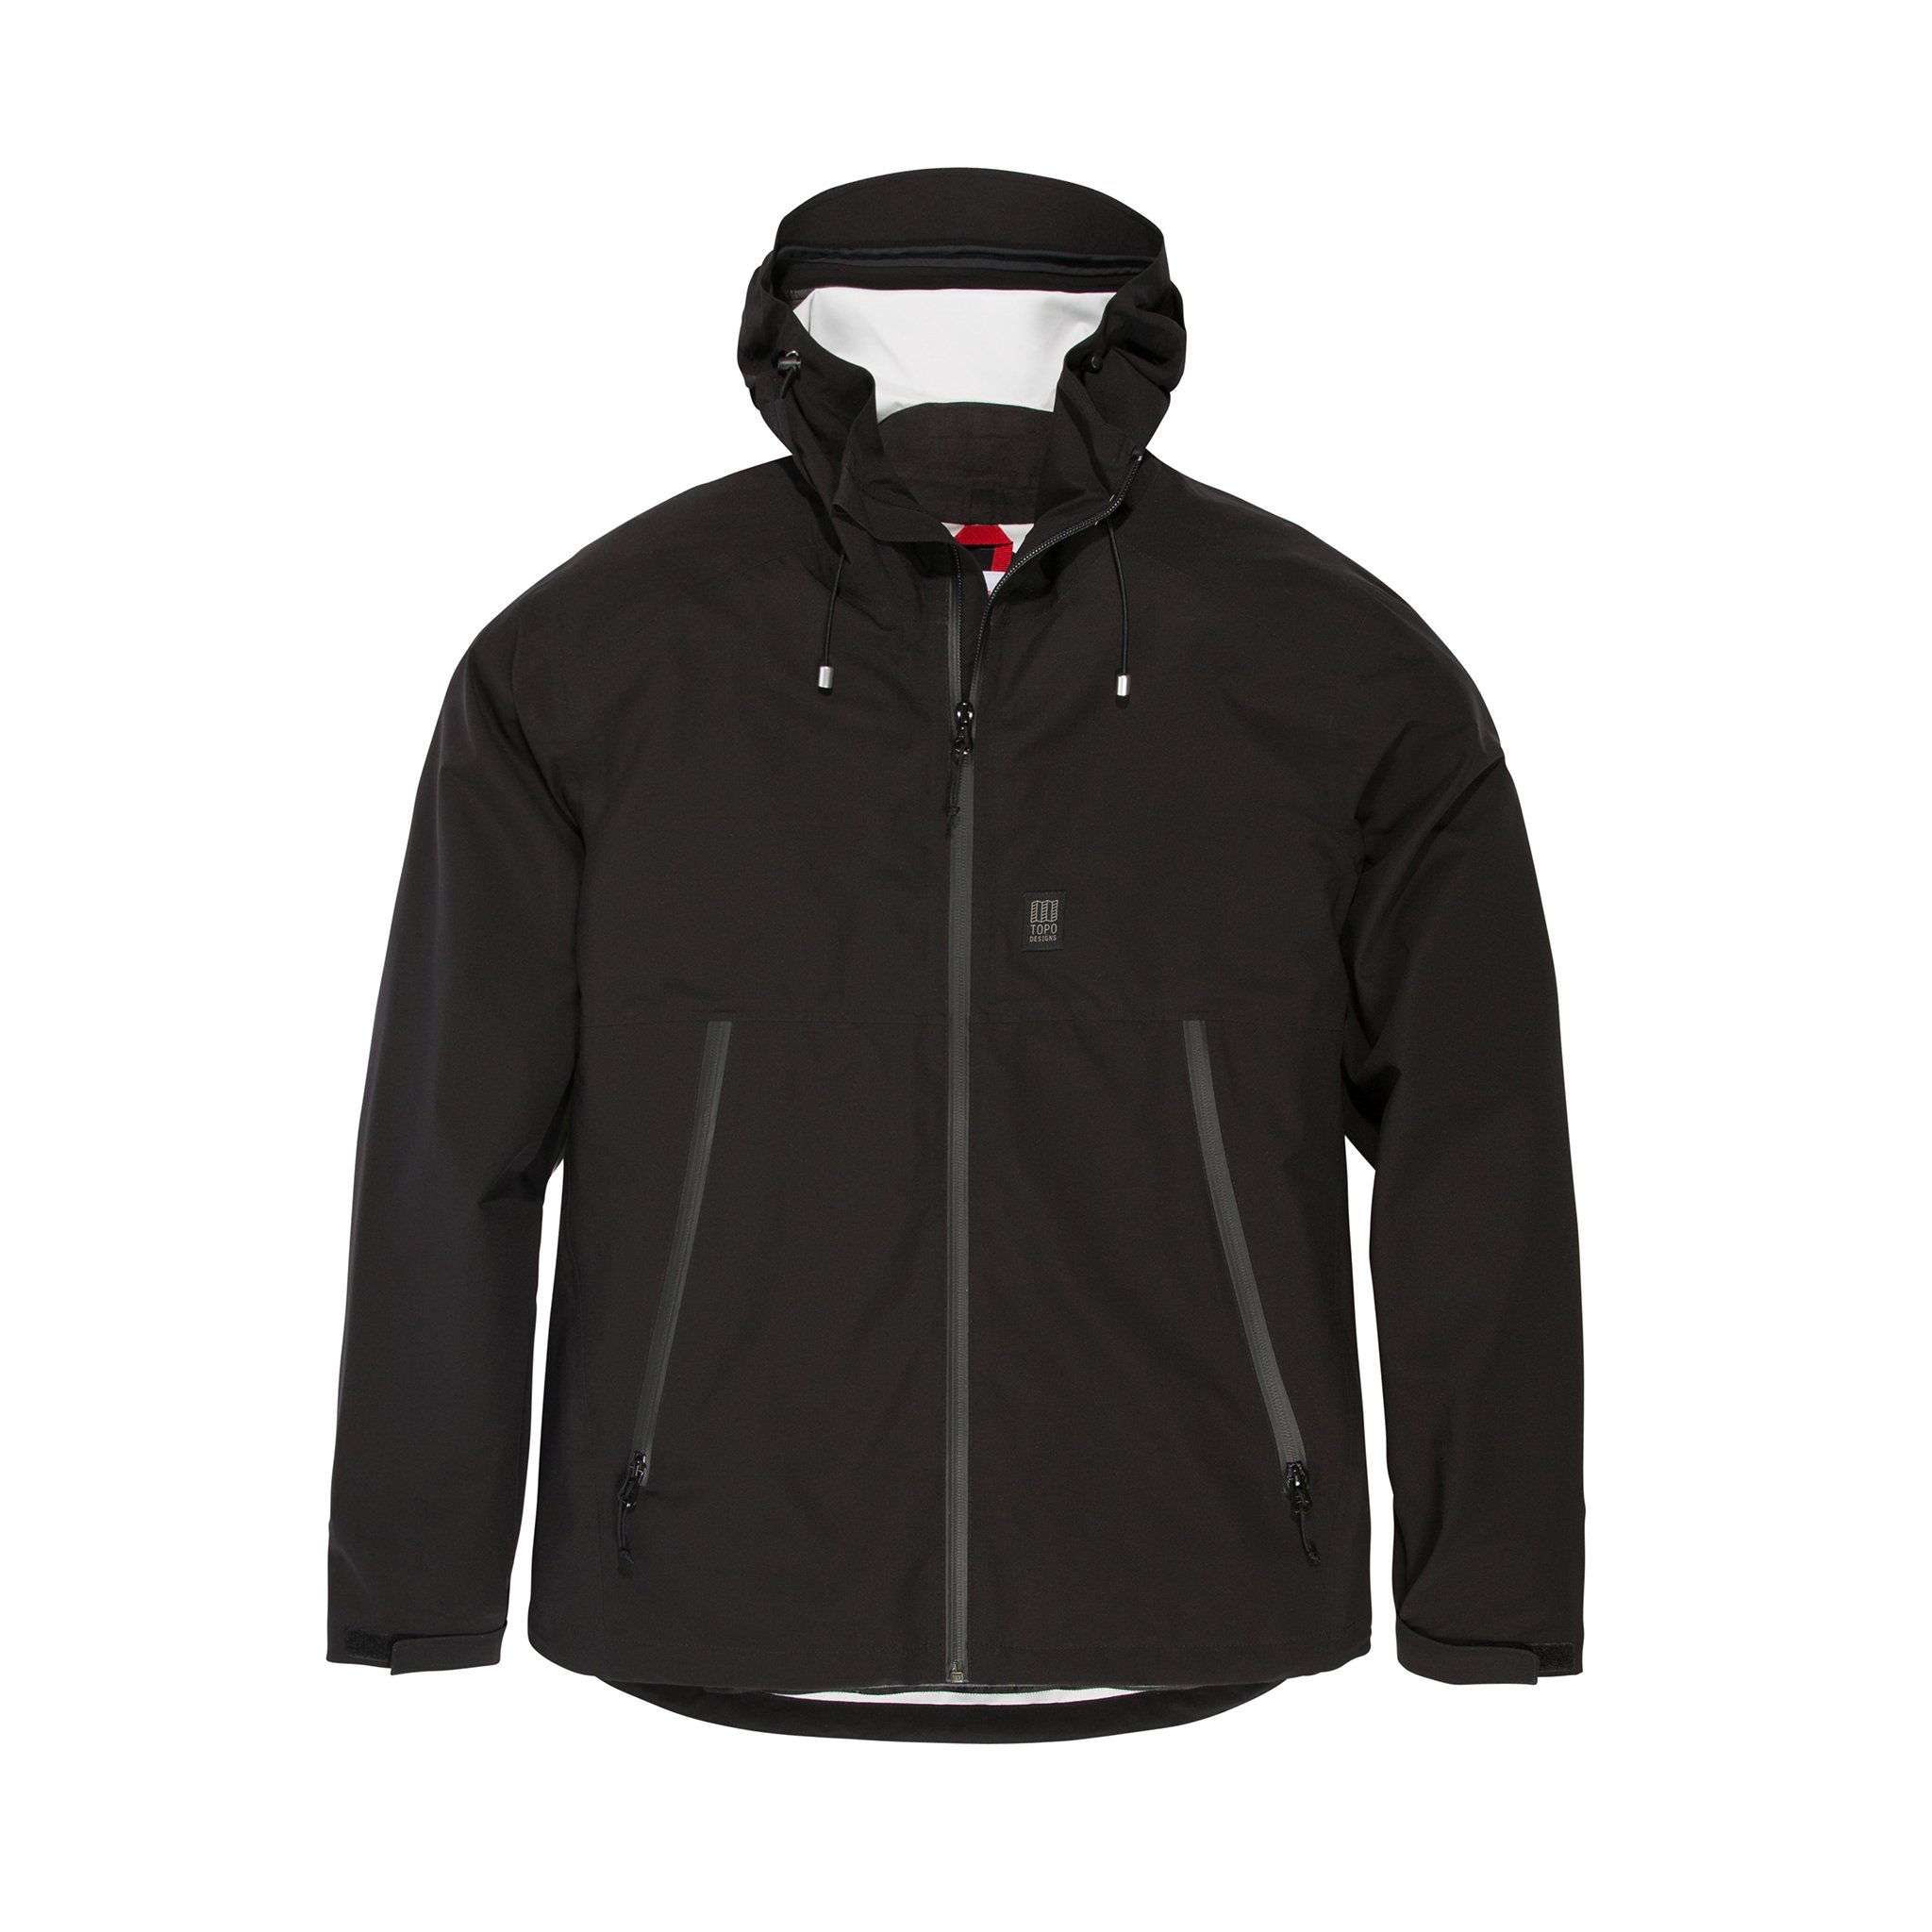 Topo Designs Global Jacket | The Coolector